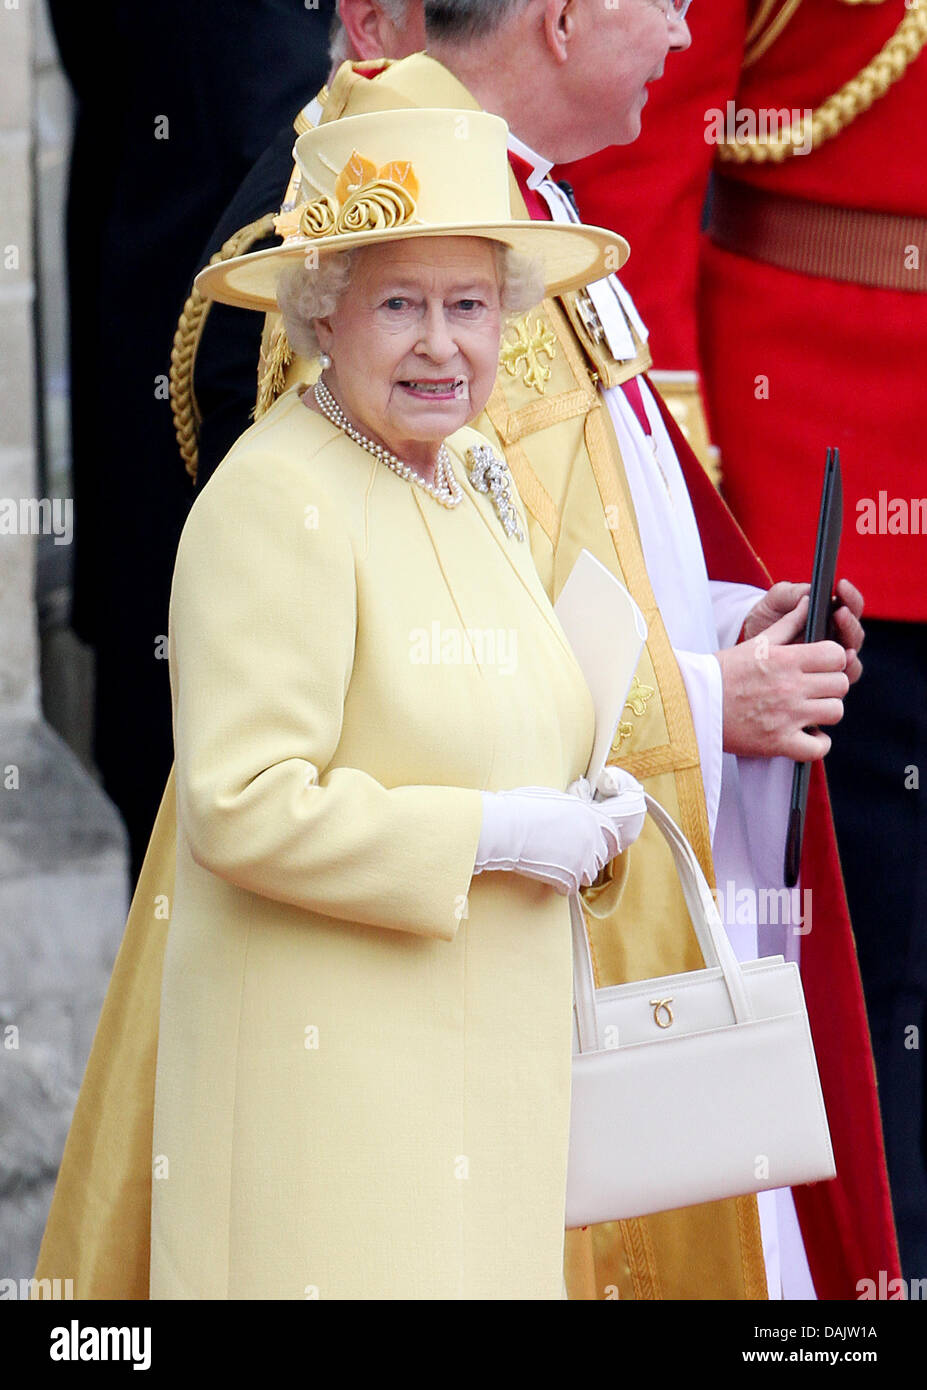 Queen Elizabeth II. leaves Westminster Abbey after the wedding ceremony of Prince William and Princess Catherine in London, Britain, 29 April 2011. Some 1,900 guests followed the royal marriage ceremony of Prince William and Kate Middleton in the church. Photo: Patrick van Katwijk Stock Photo